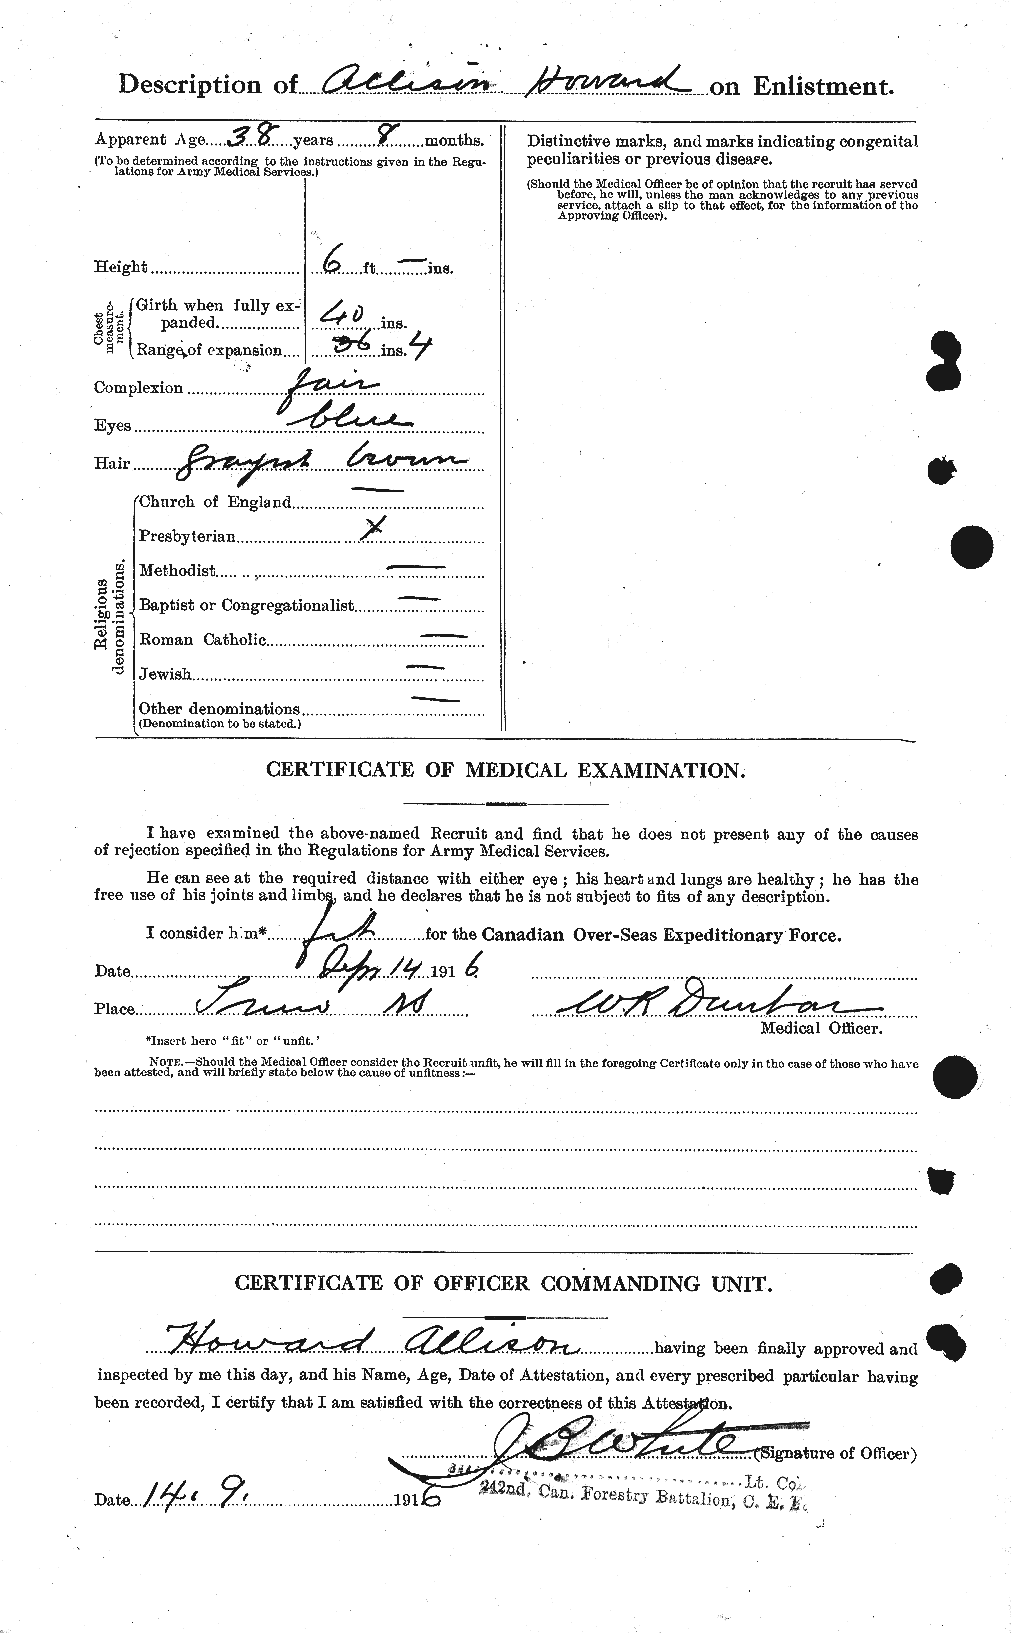 Personnel Records of the First World War - CEF 206609b